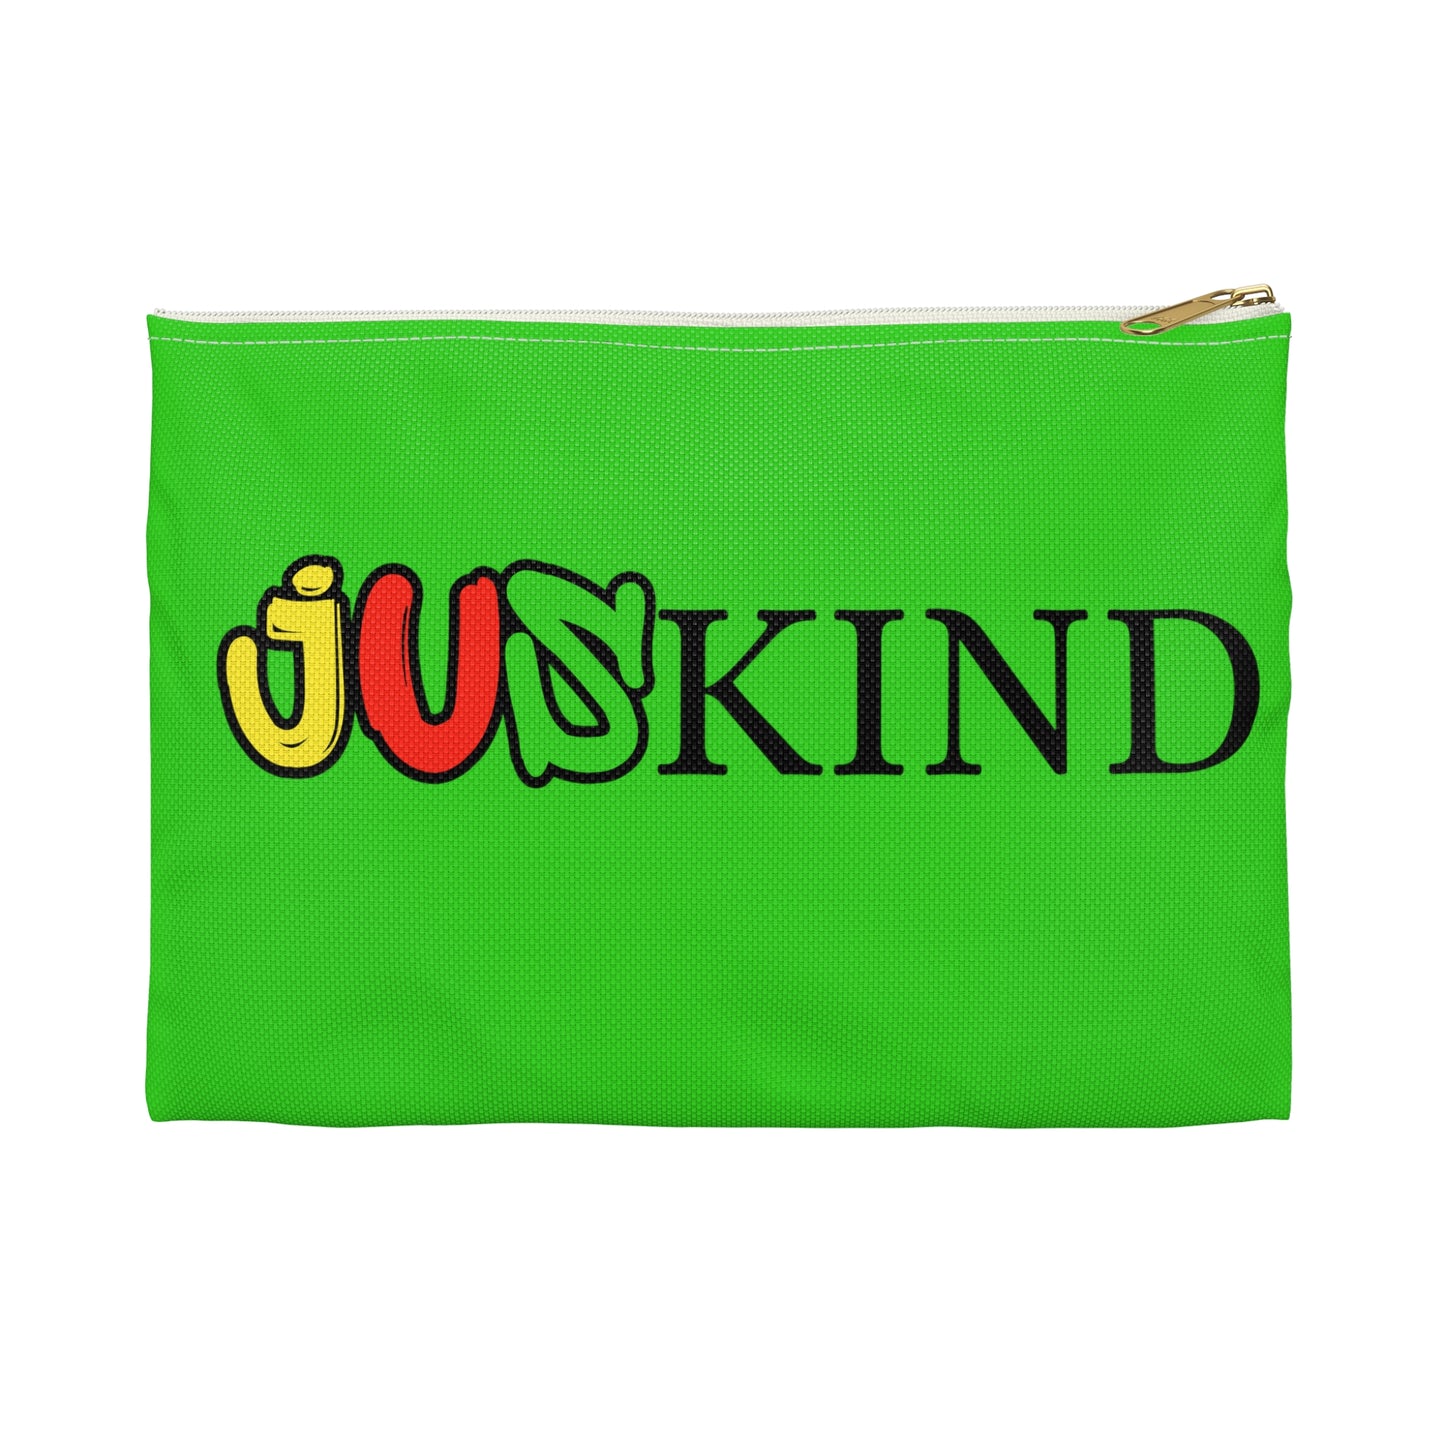 JusKind Accessory Pouch